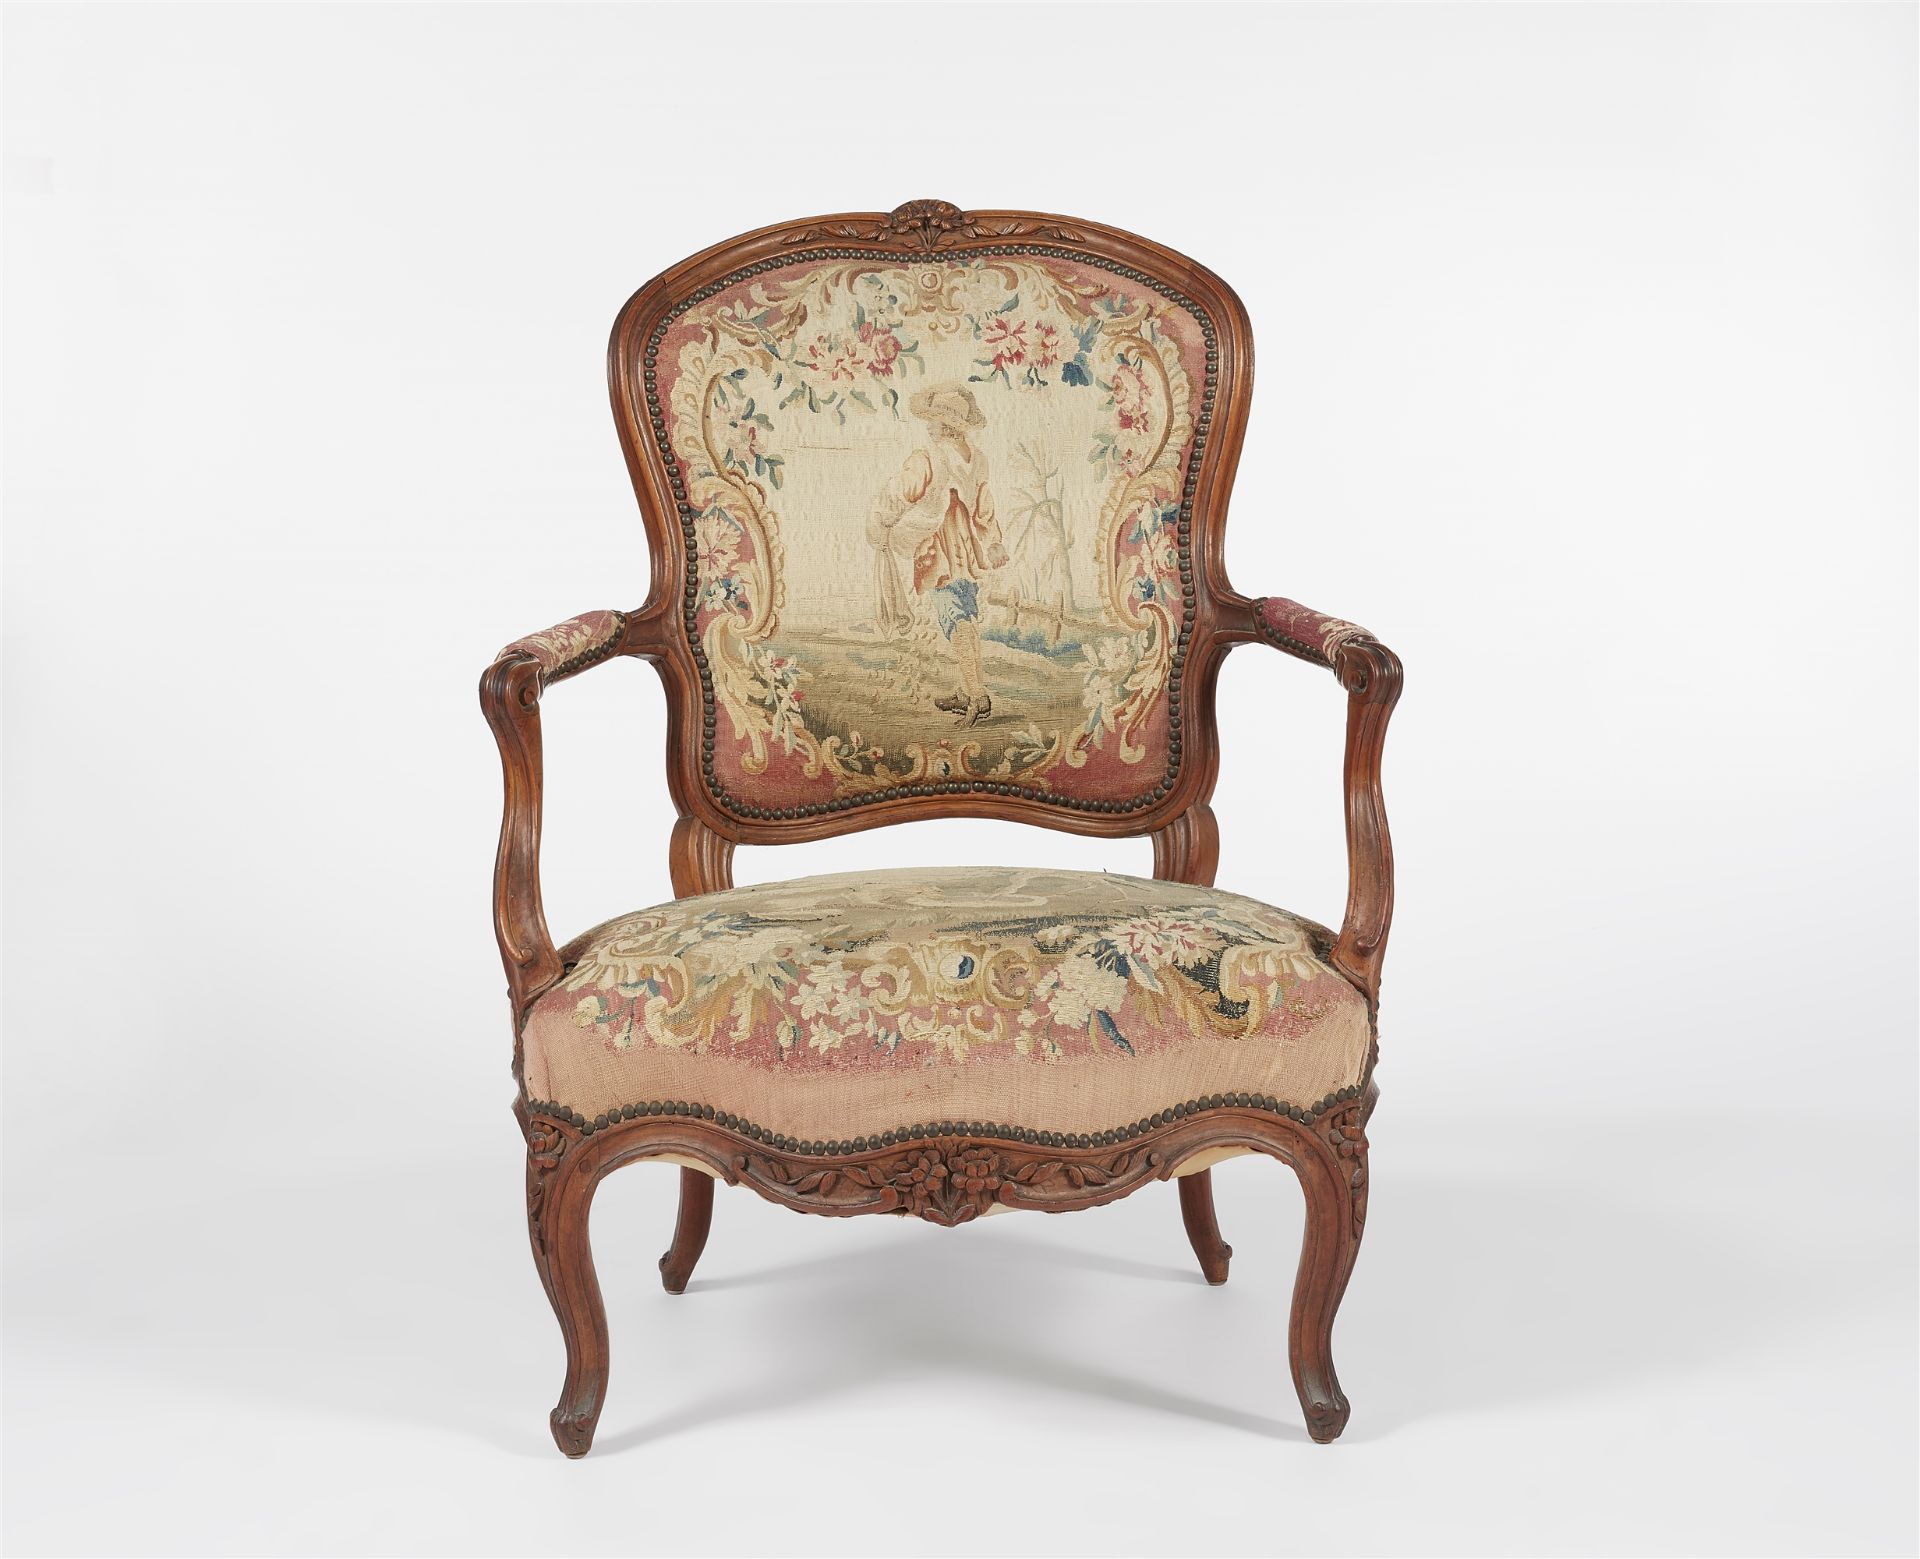 A French fauteuil